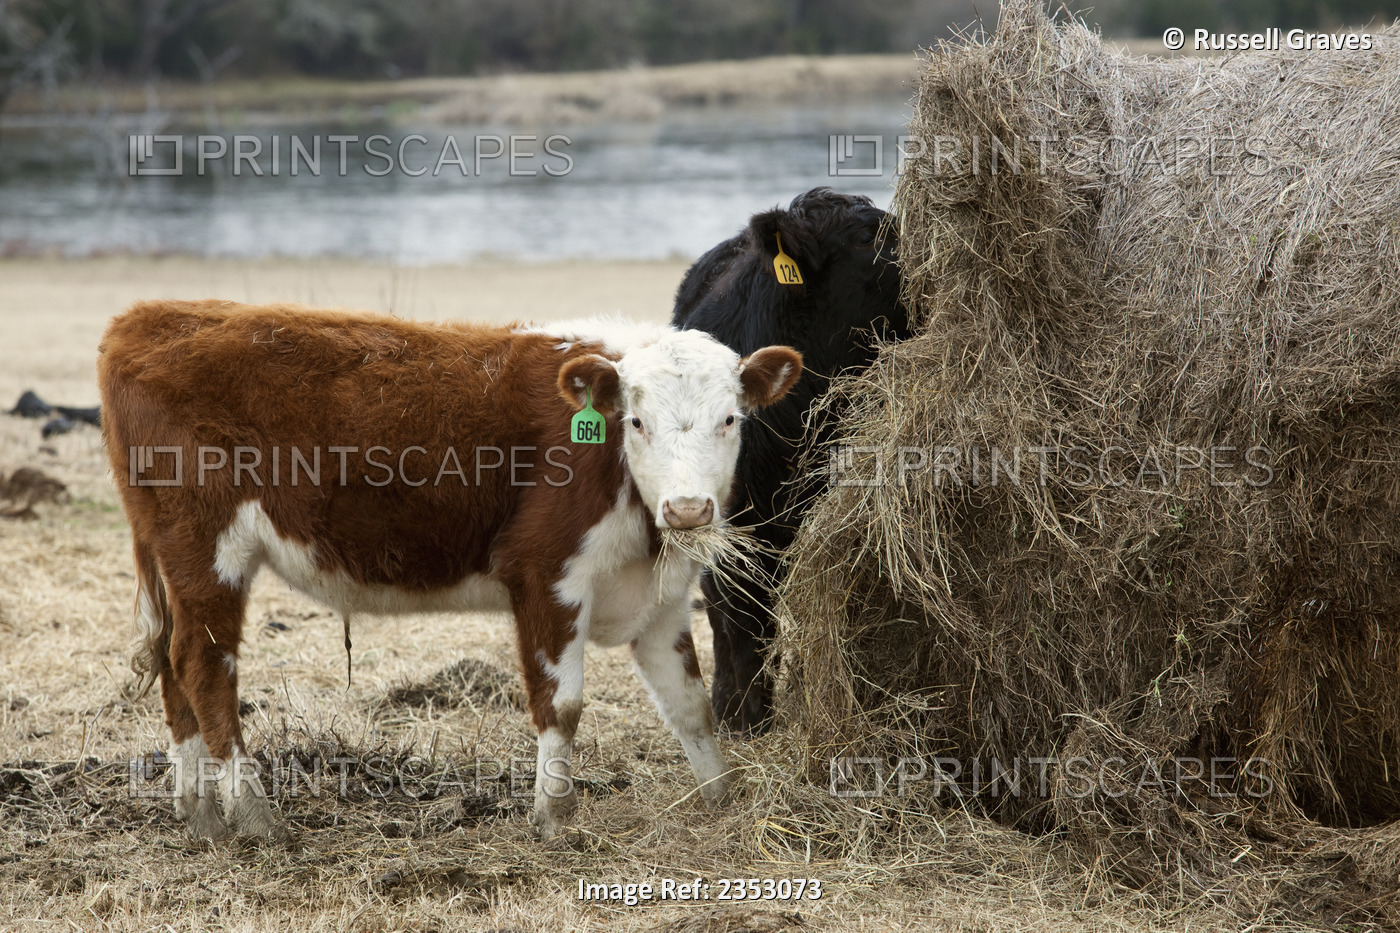 Livestock - A Hereford yearling beef calf feeding on hay from a round hay bale ...